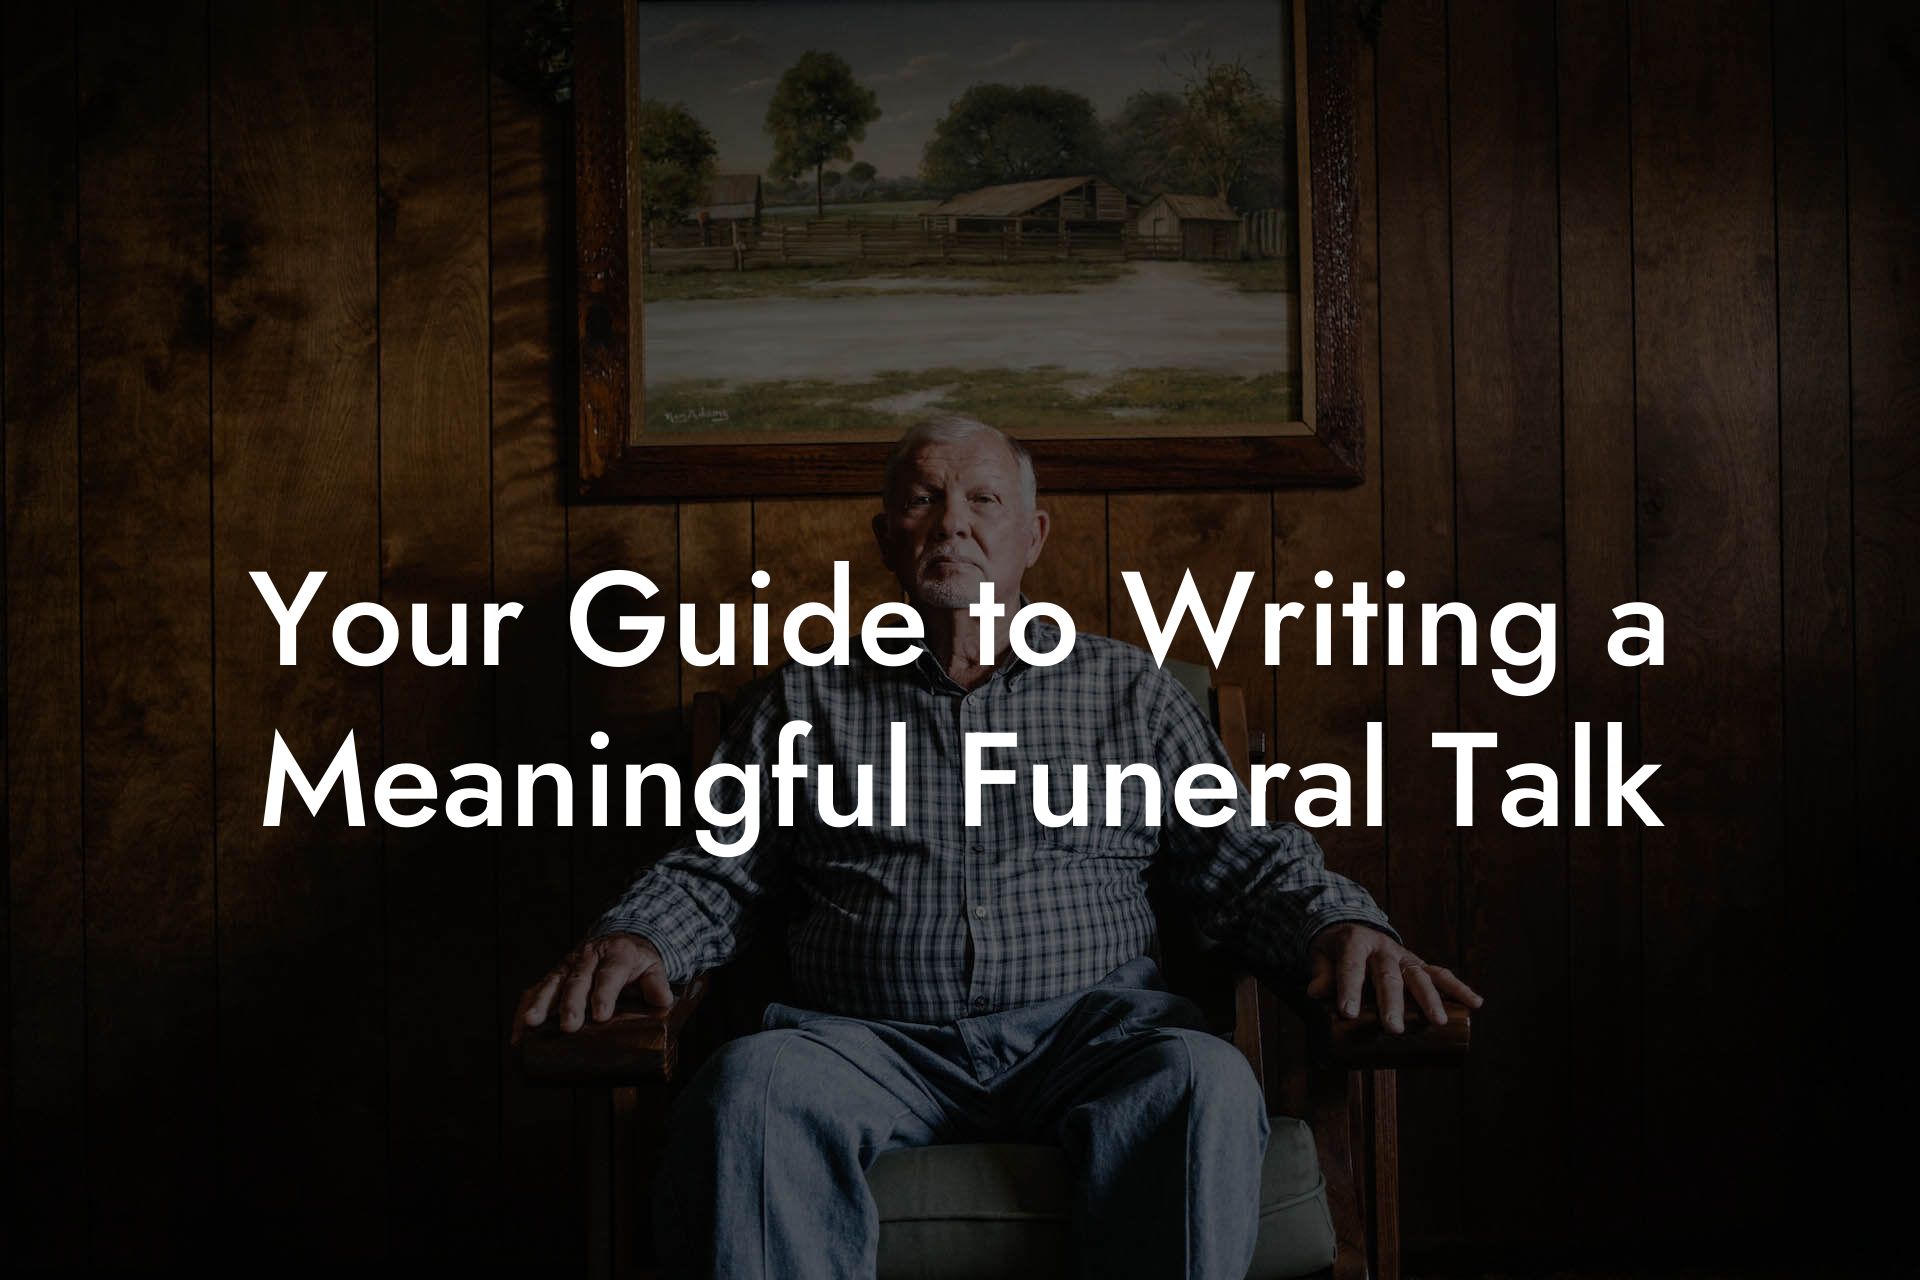 Your Guide to Writing a Meaningful Funeral Talk